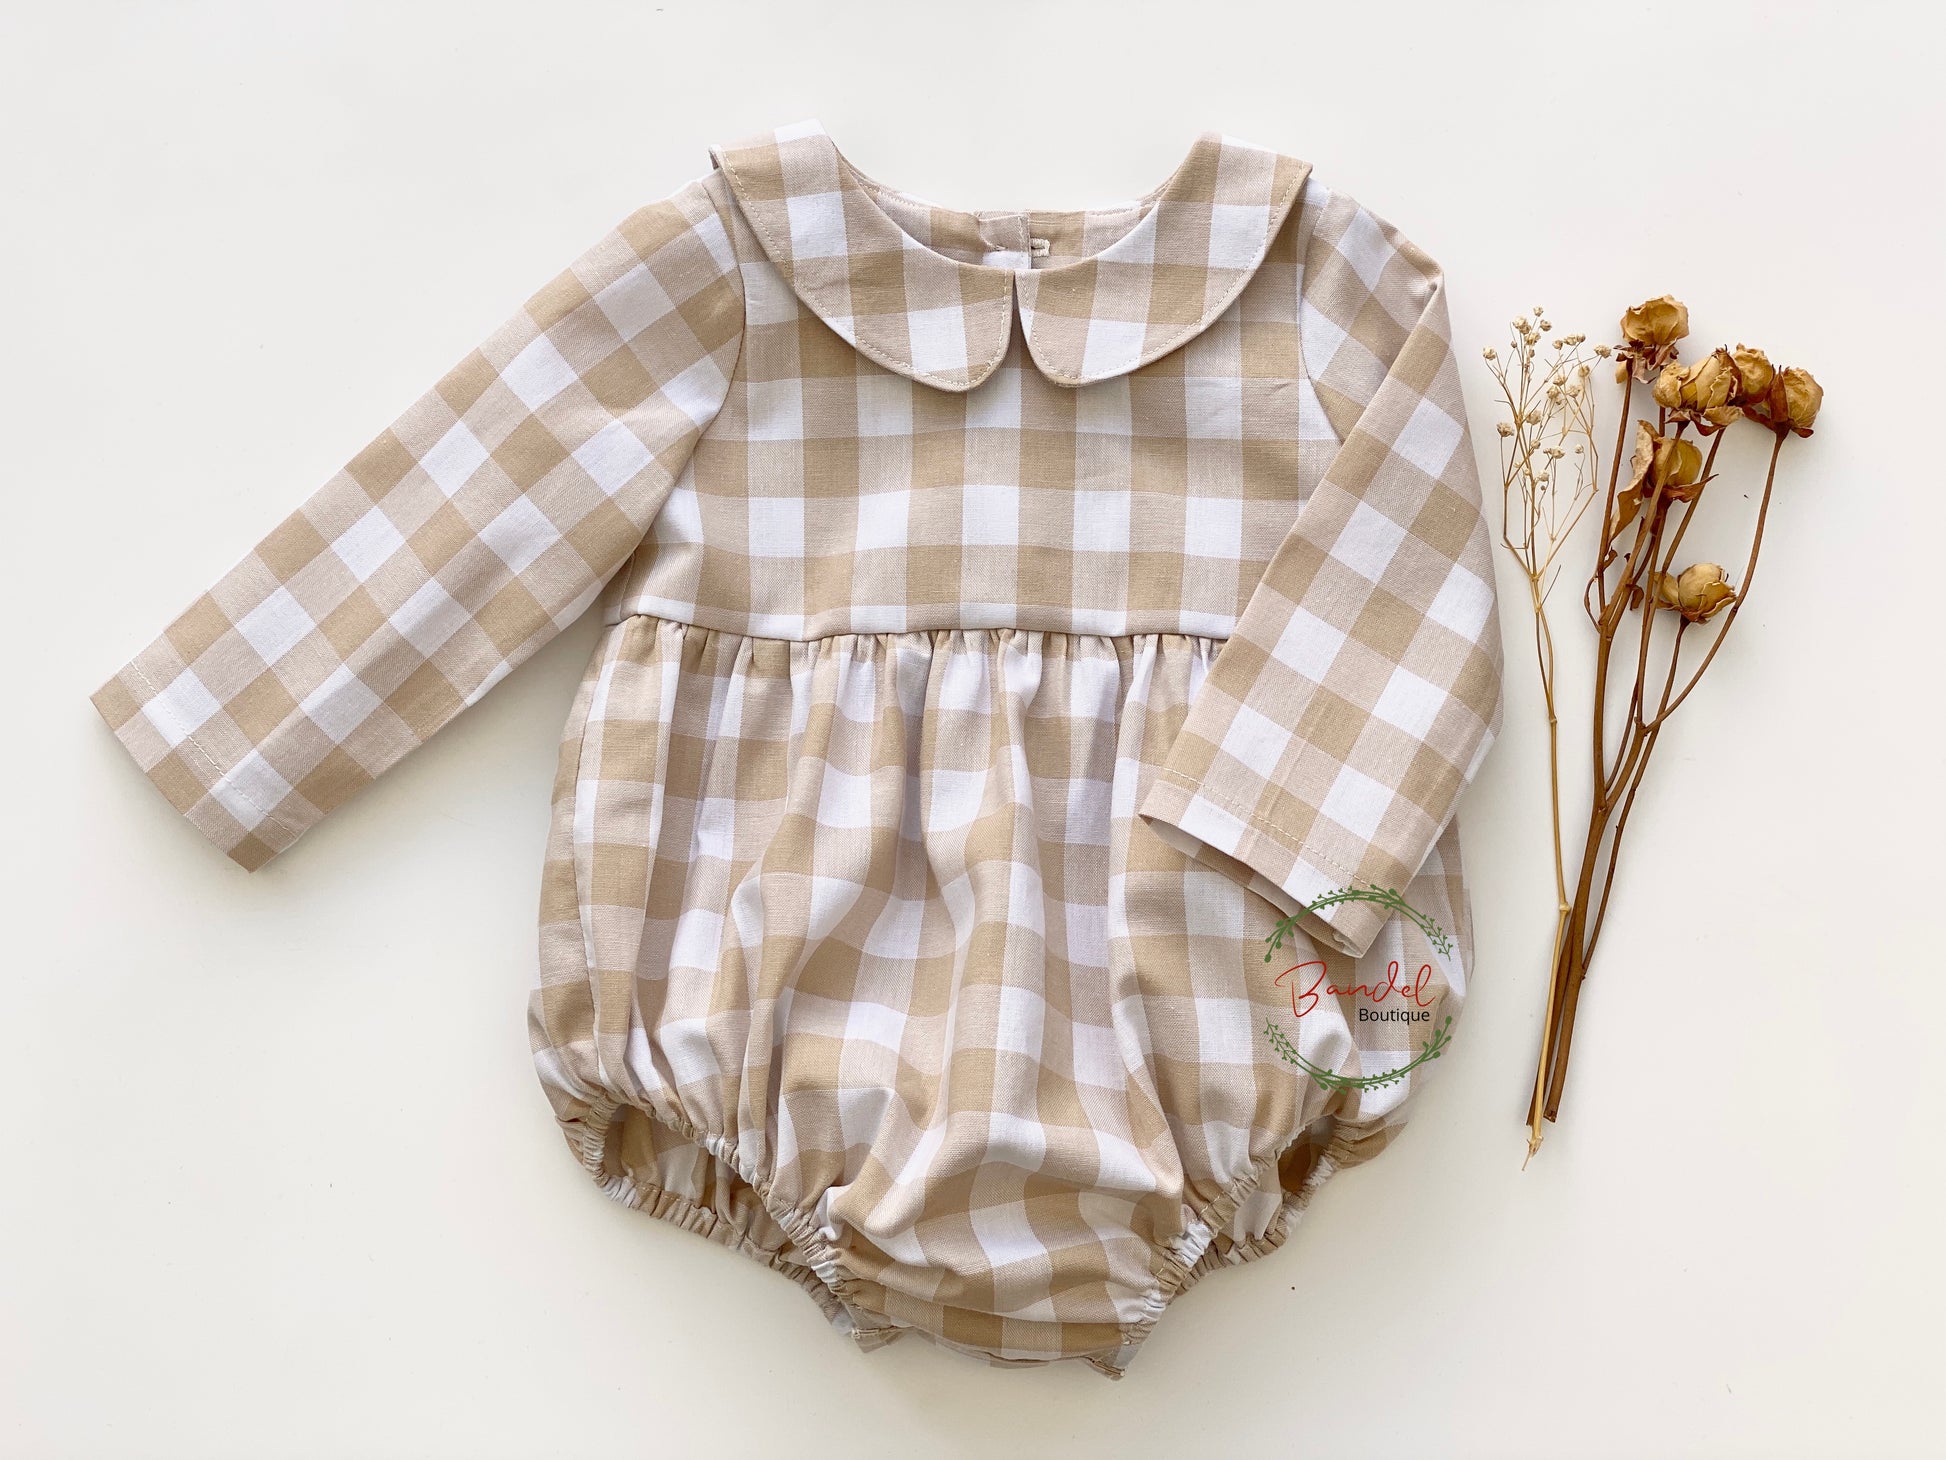 classic Cream Check Romper is lovingly handmade to offer lasting comfort and style for your little one. Crafted from beige check cotton, it features long-sleeves, a Peter Pan collar, elastic at the leg, wooden buttons at the back and snaps at the crotch for easy dressing.